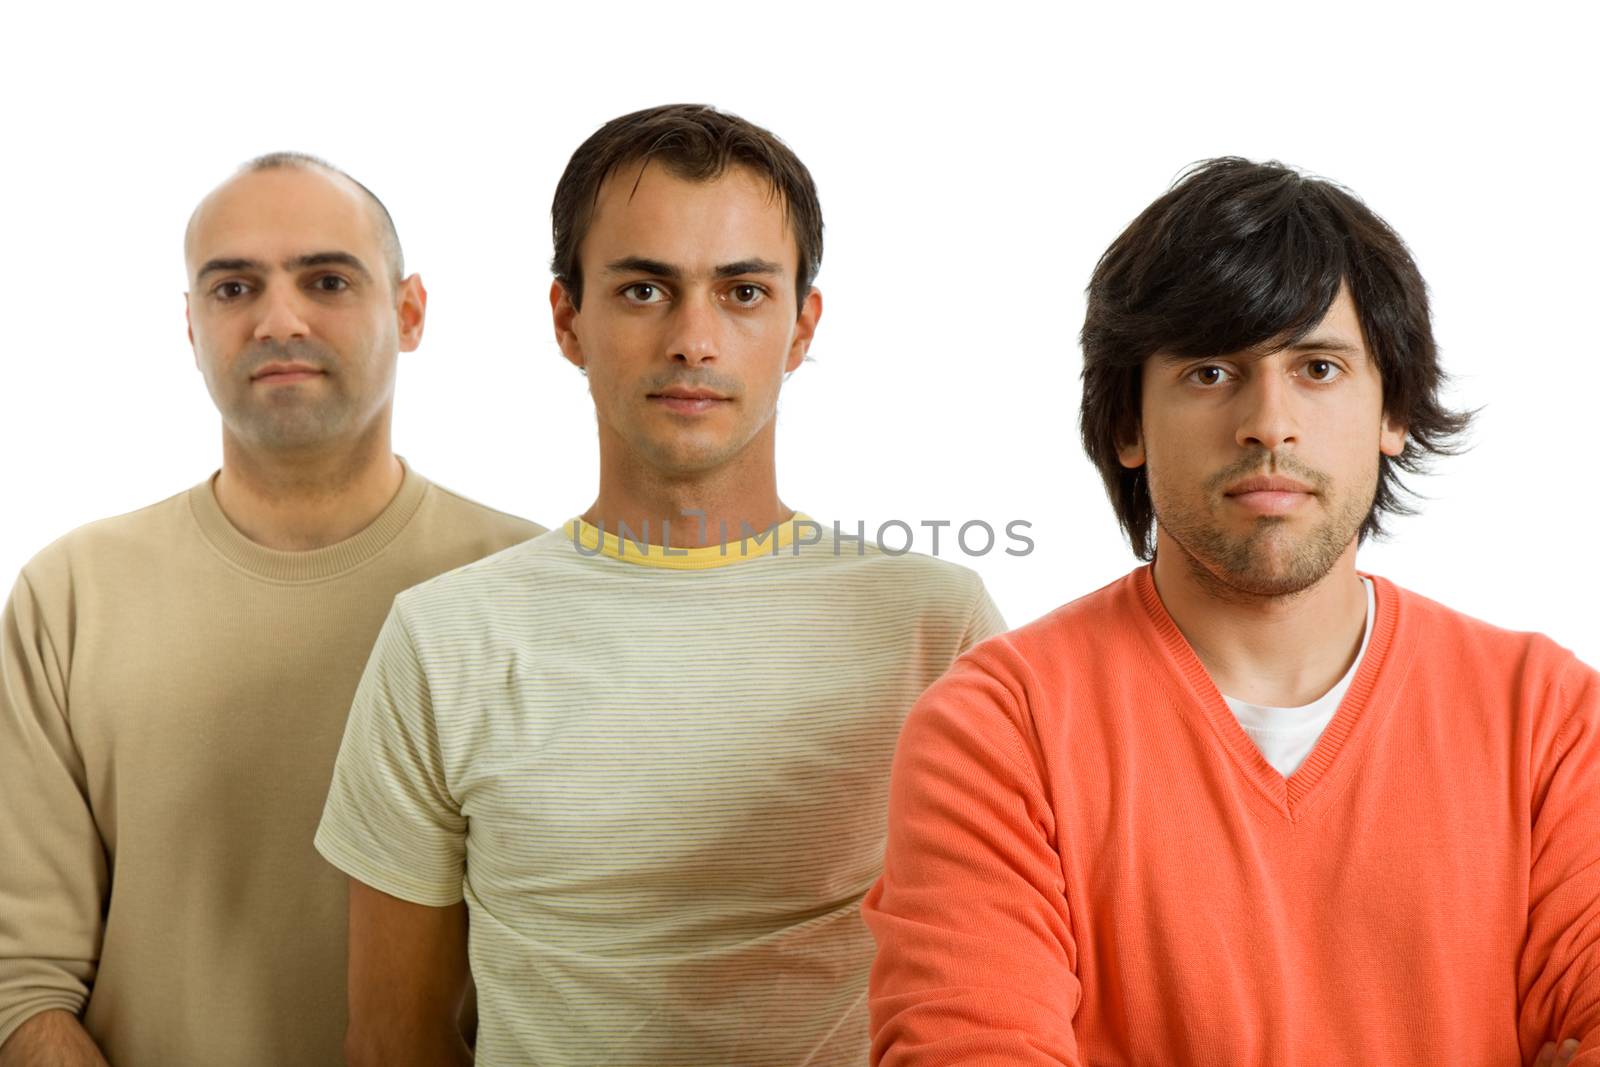 three casual men isolated on white background